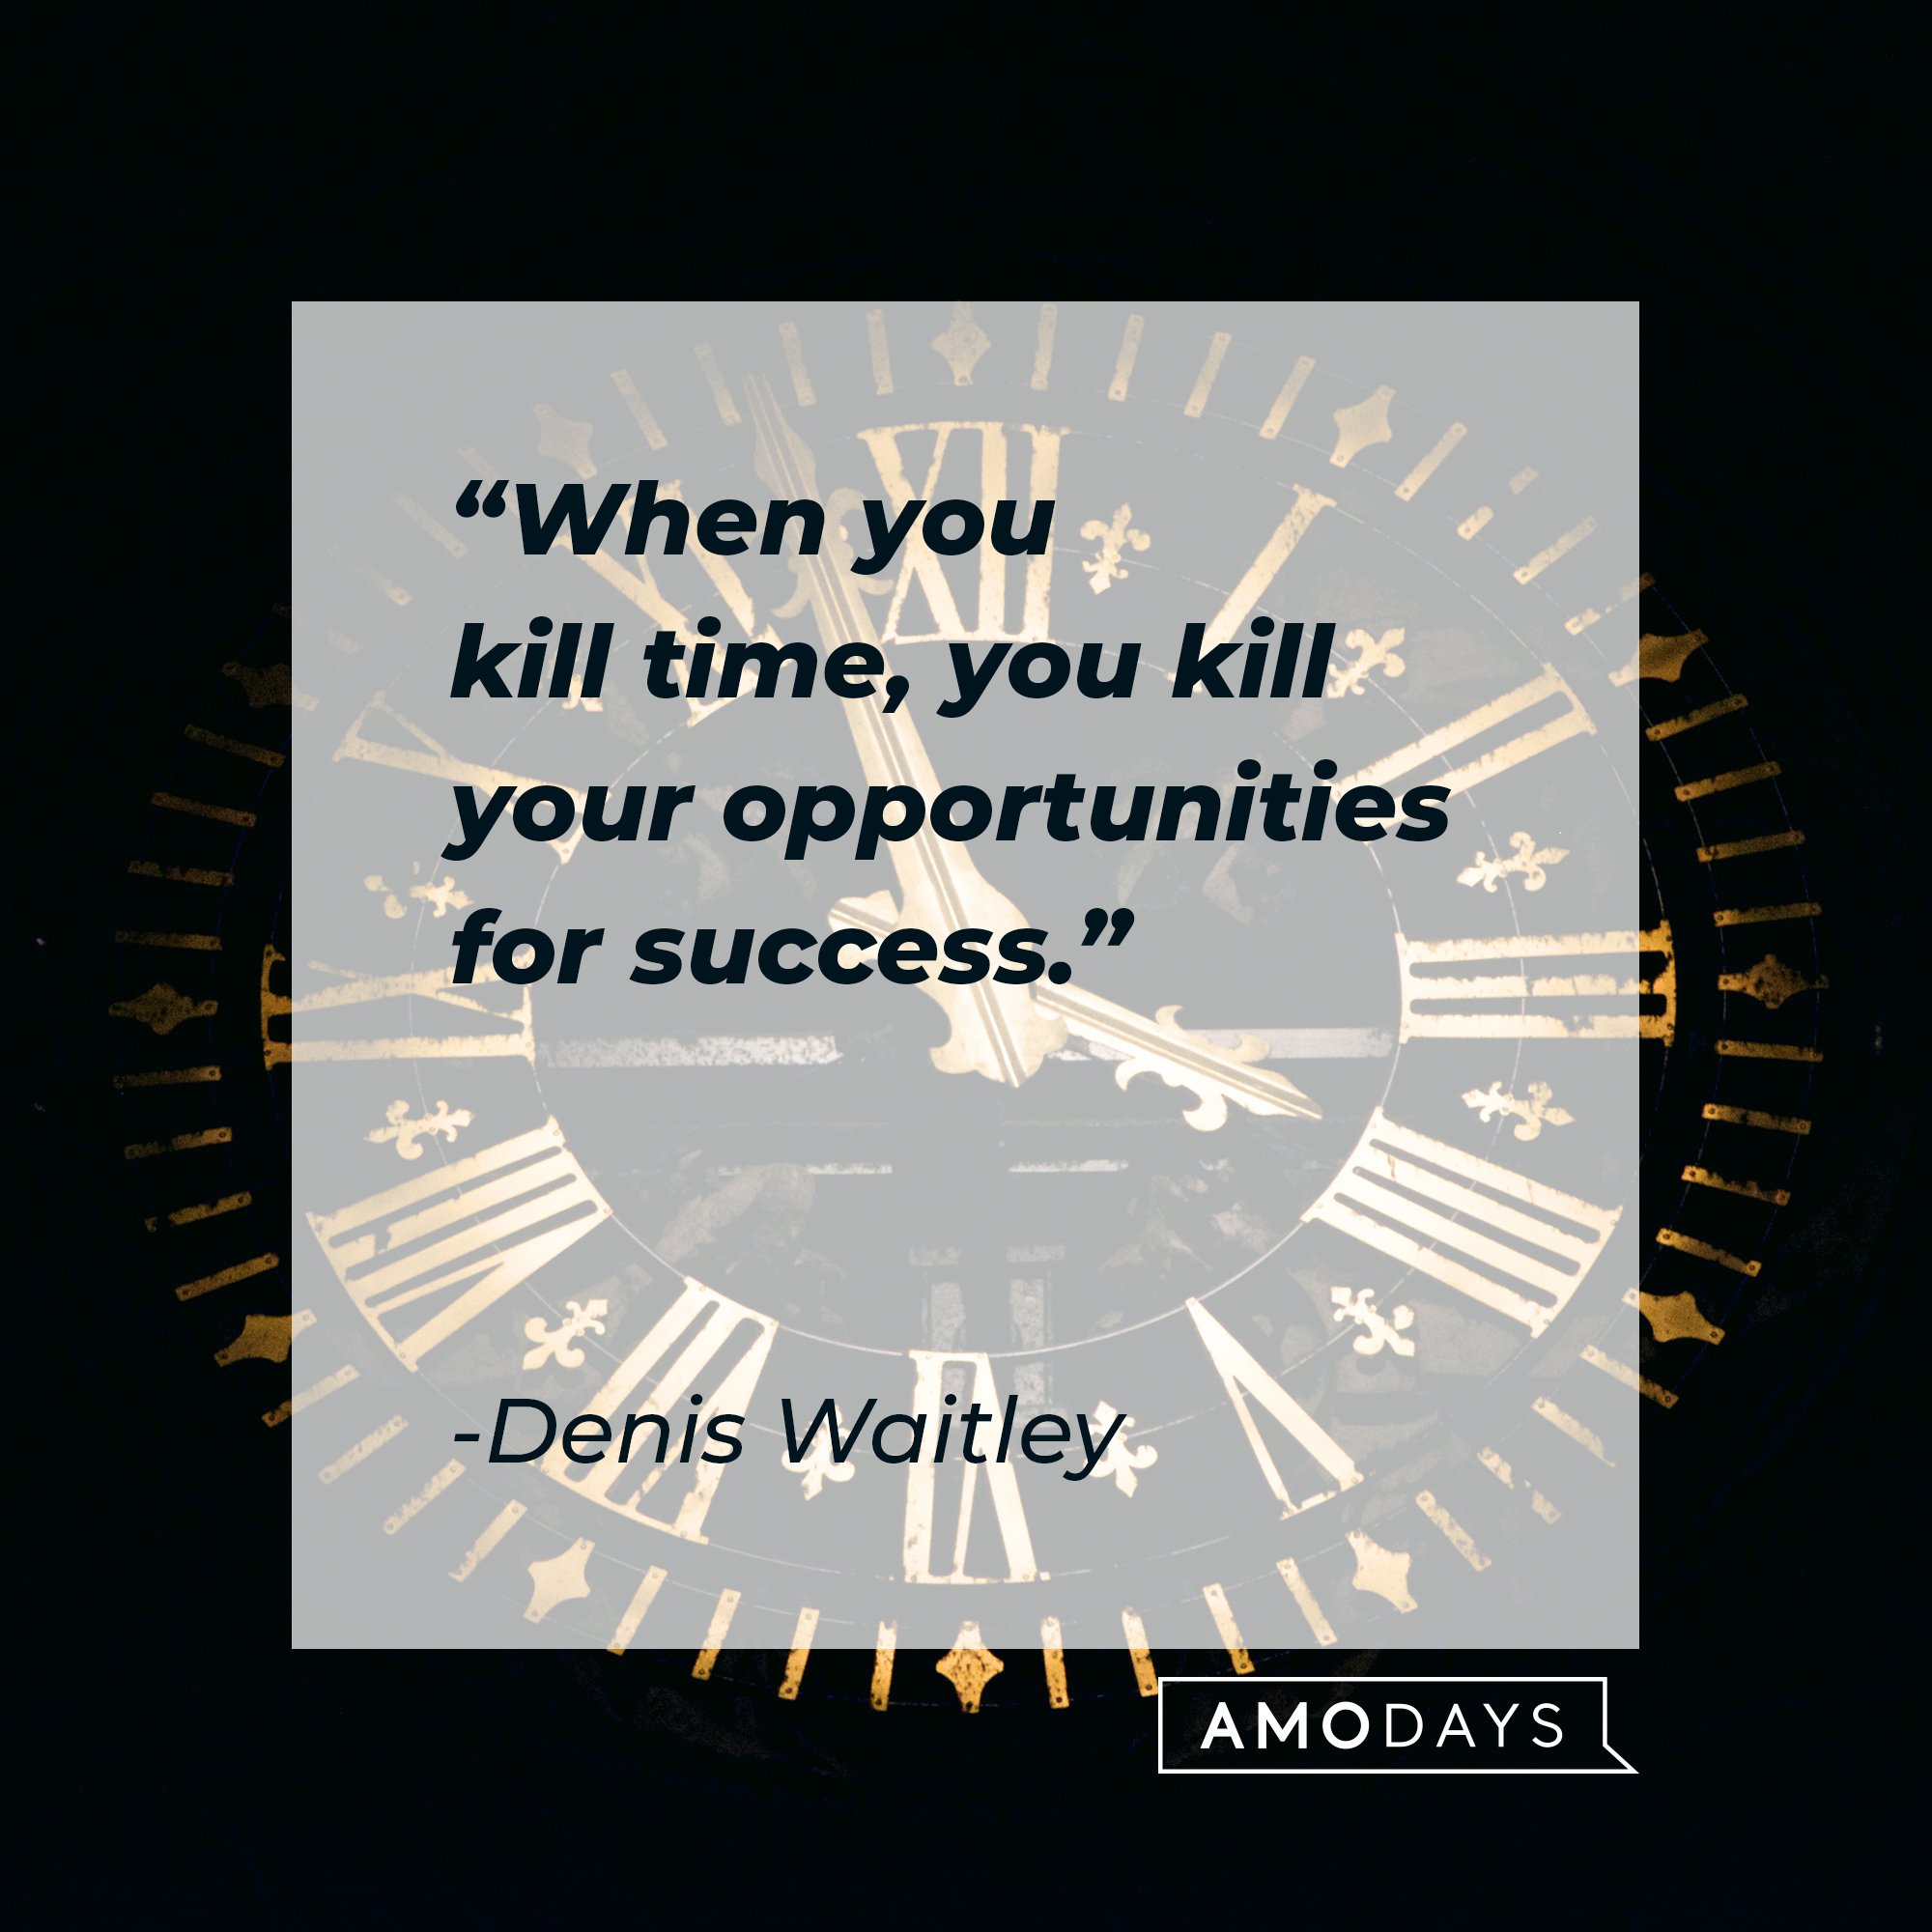  Denis Waitley’s quote: "When you kill time, you kill your opportunities for success." | Image: AmoDays   